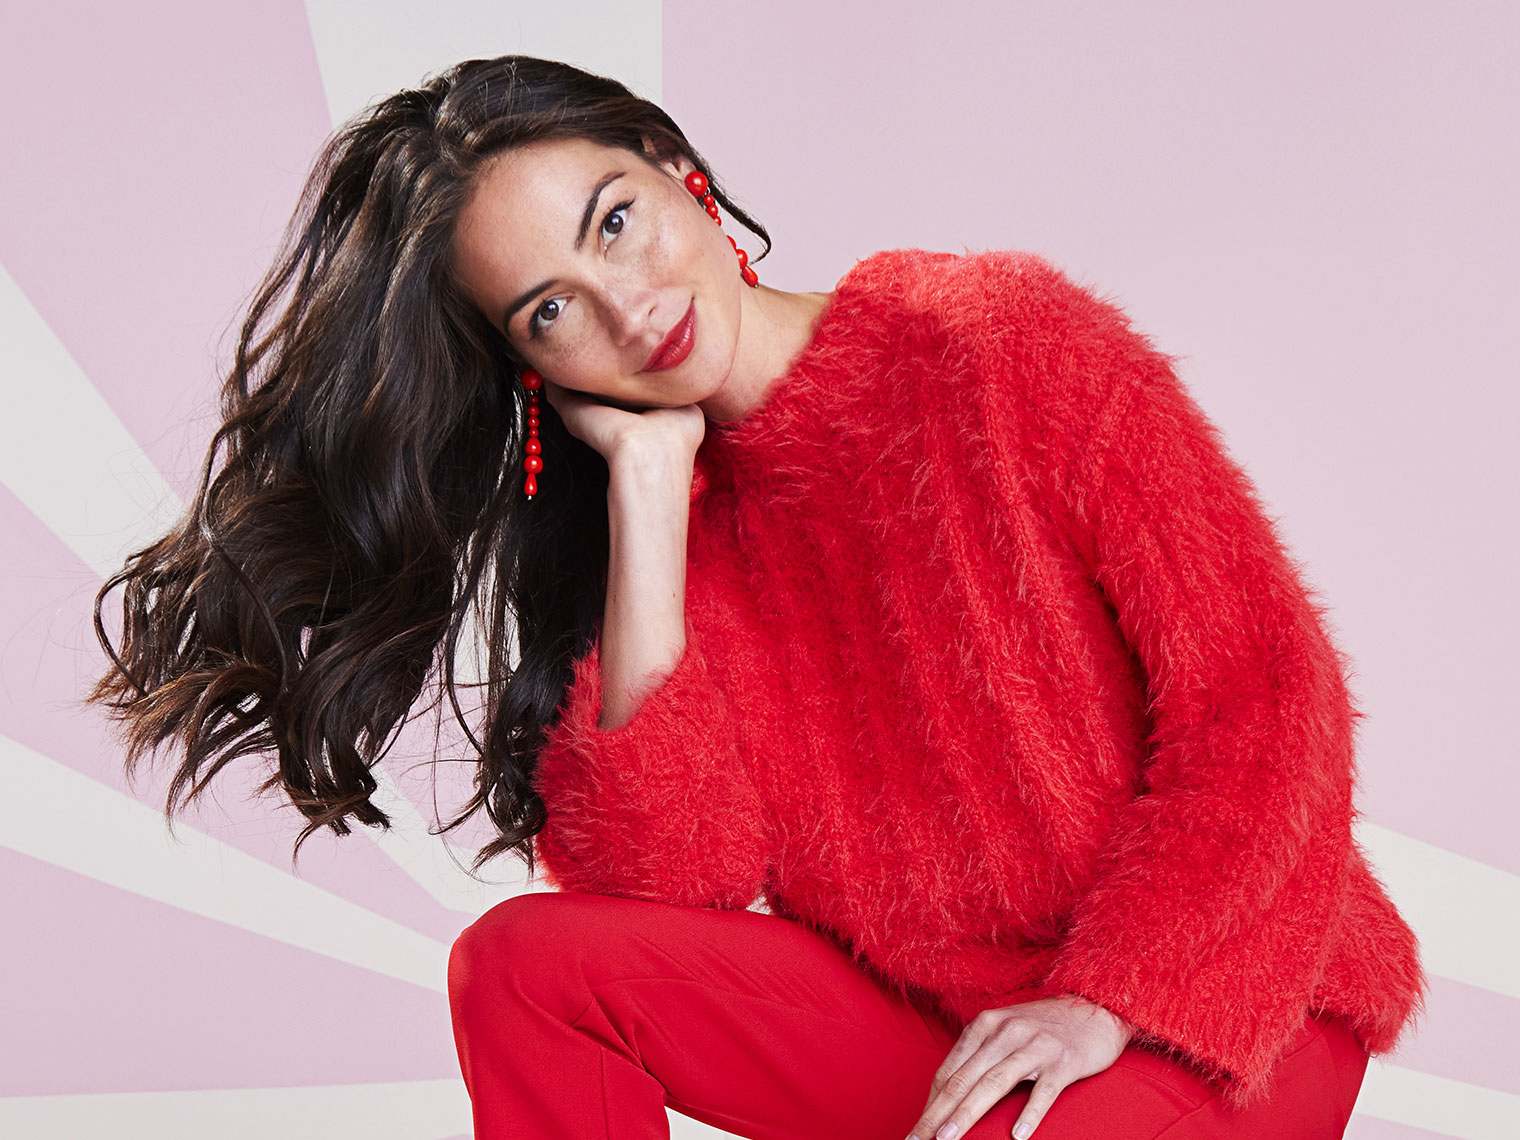 woman wearing a red sweater